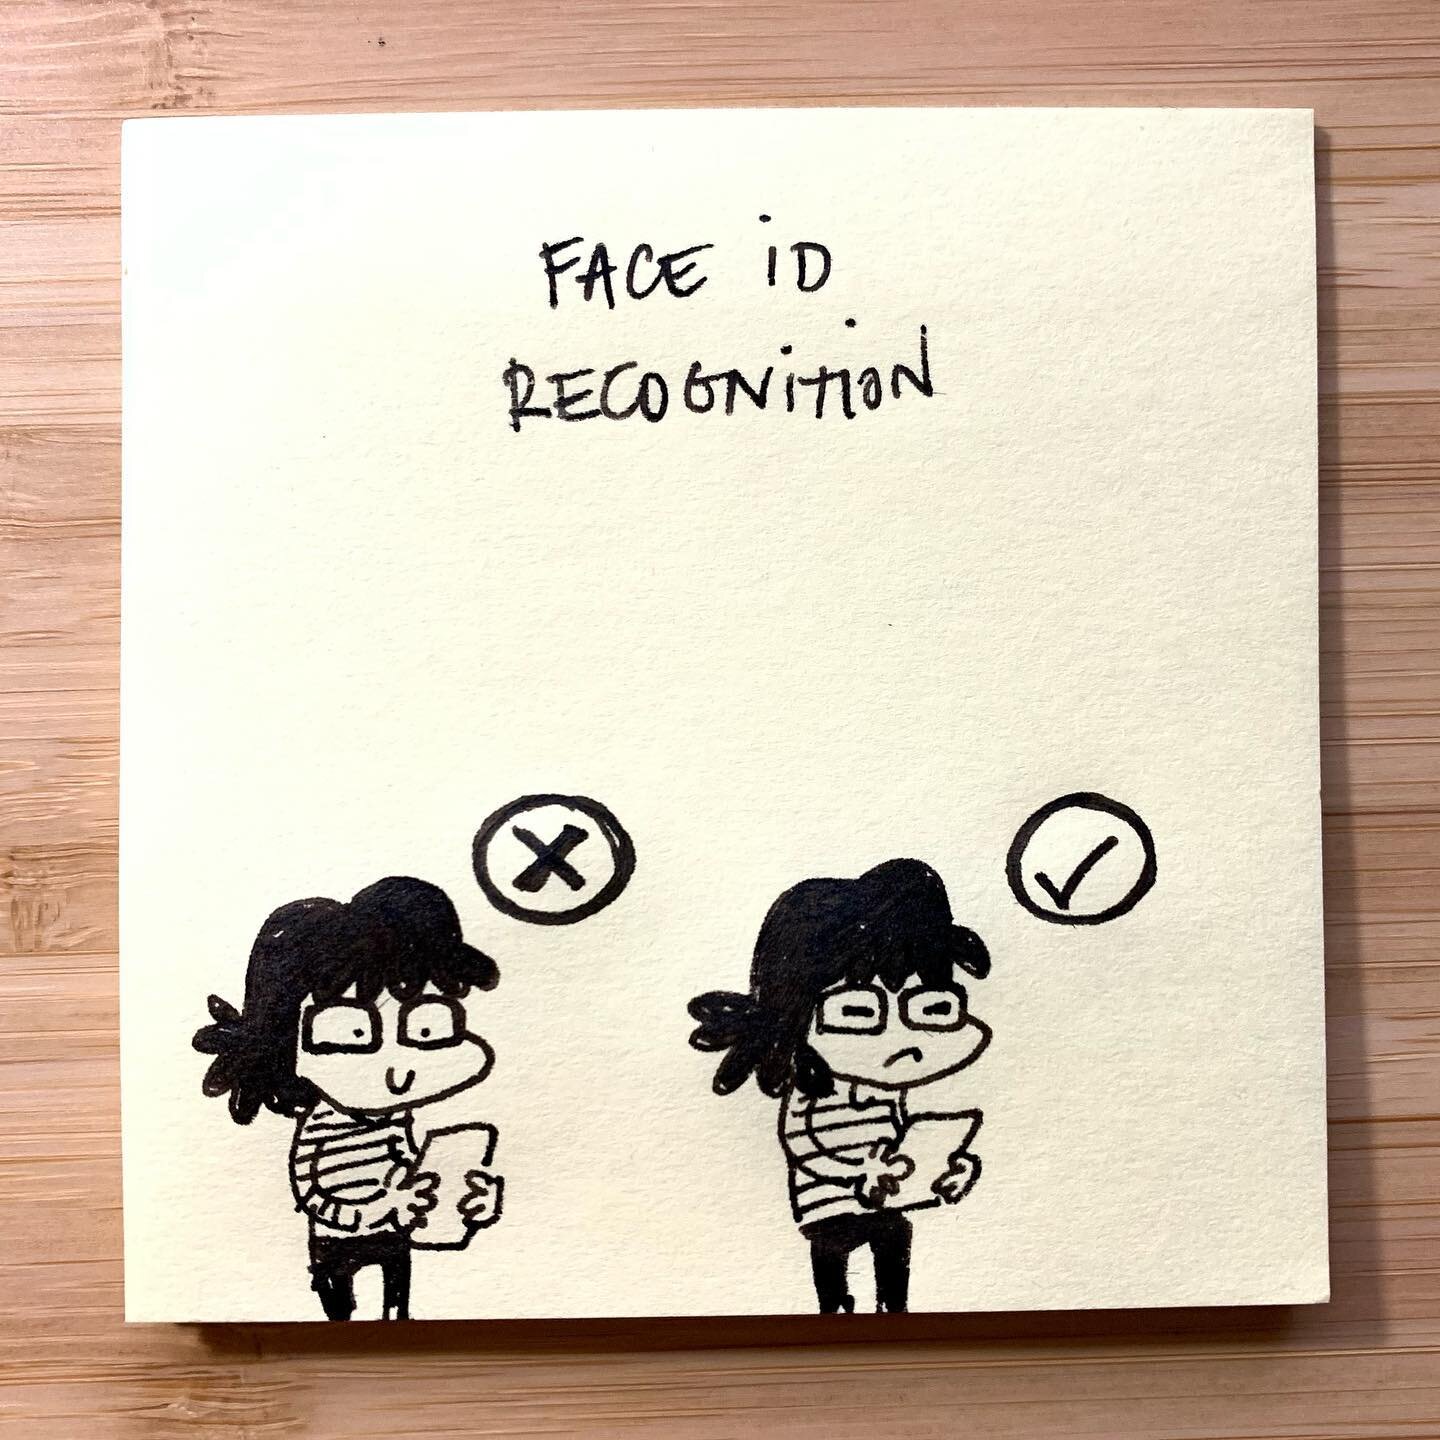 Should I be concerned my iPhone prefers my grumpy frowned face to a smile? 🤔 #grumpyfaceid #faceid #iphone #apple #iphonemystery #doodle #postit #2021